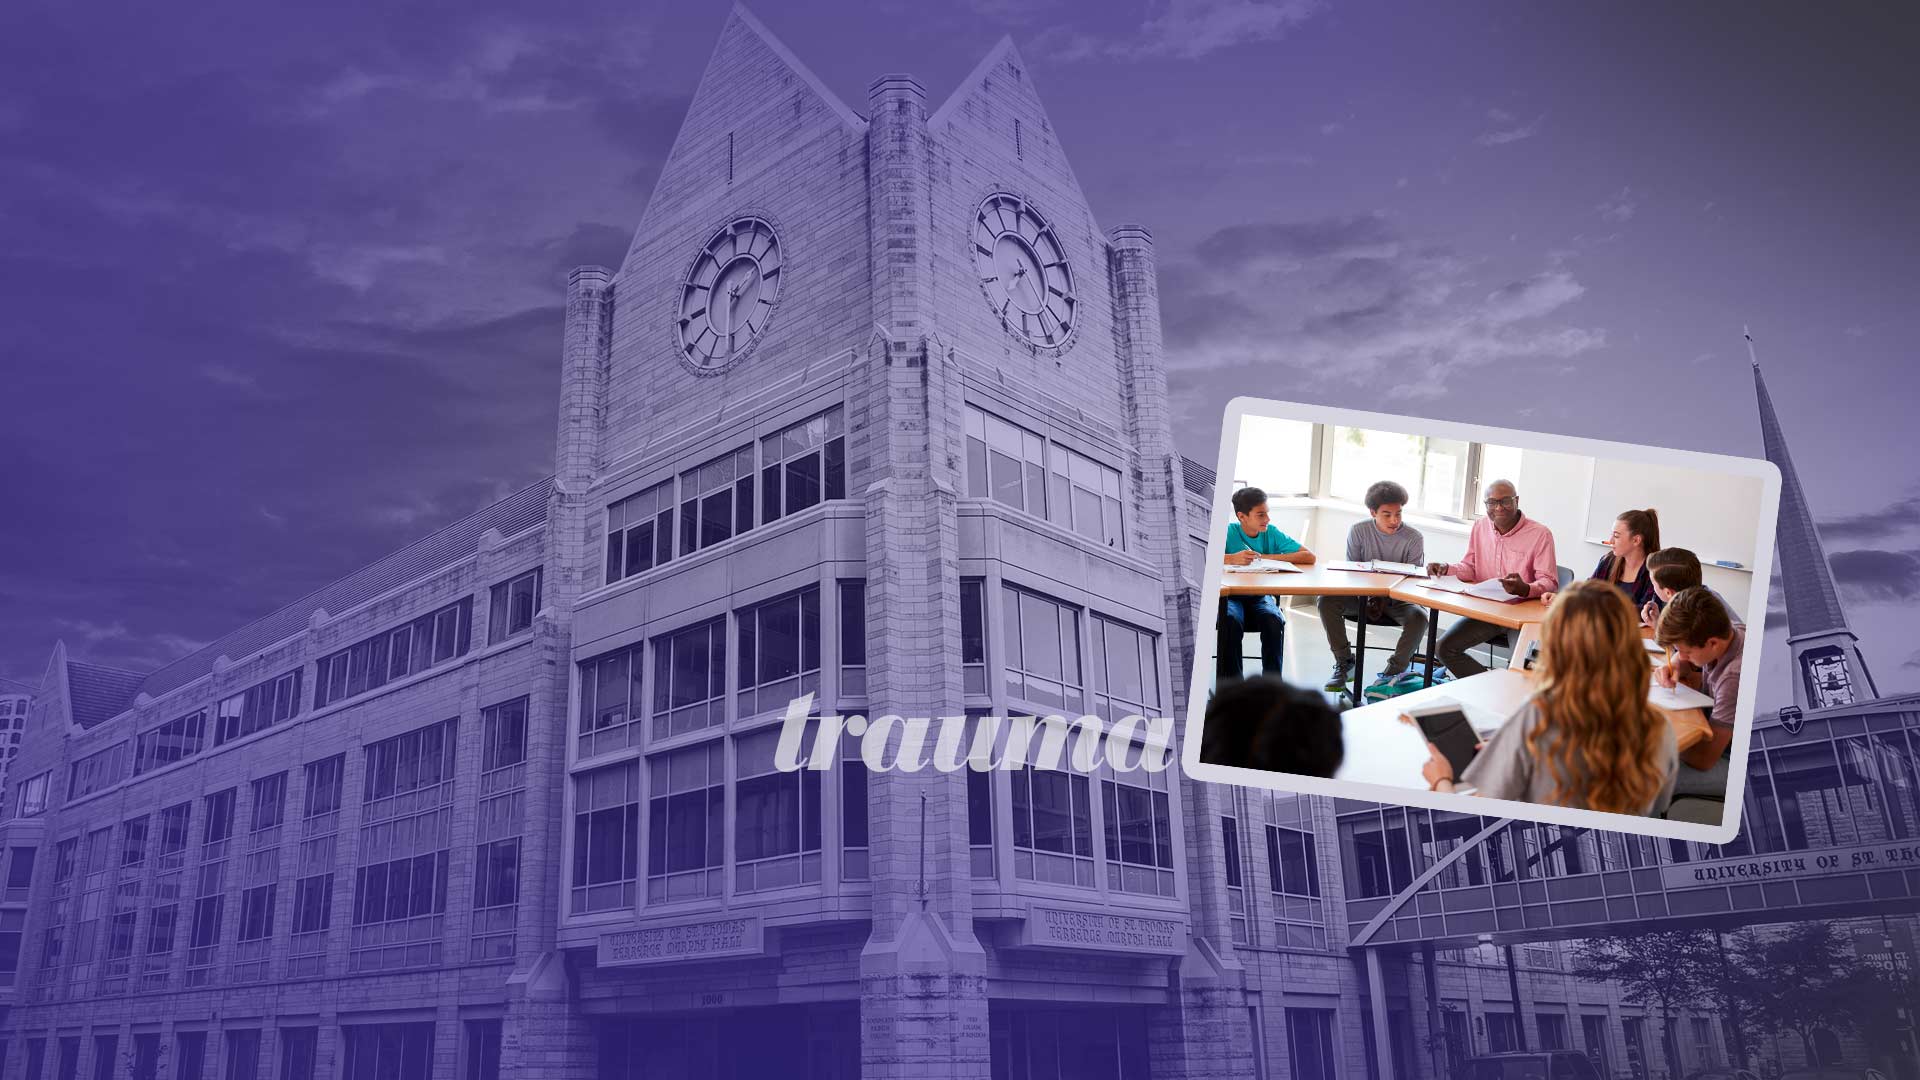 inset photo of people around a conference table against background of a building photo tinted purple